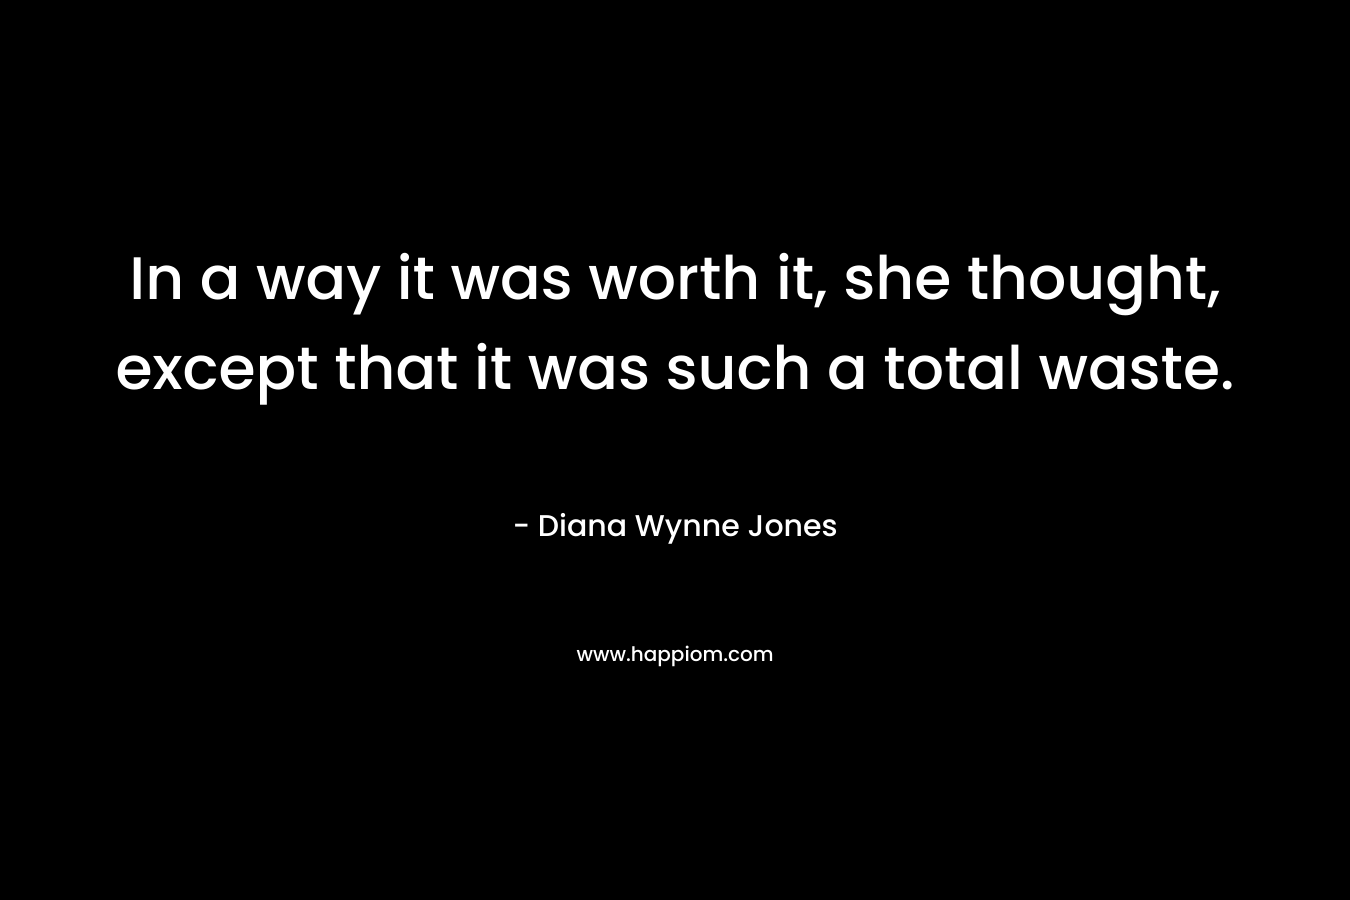 In a way it was worth it, she thought, except that it was such a total waste. – Diana Wynne Jones